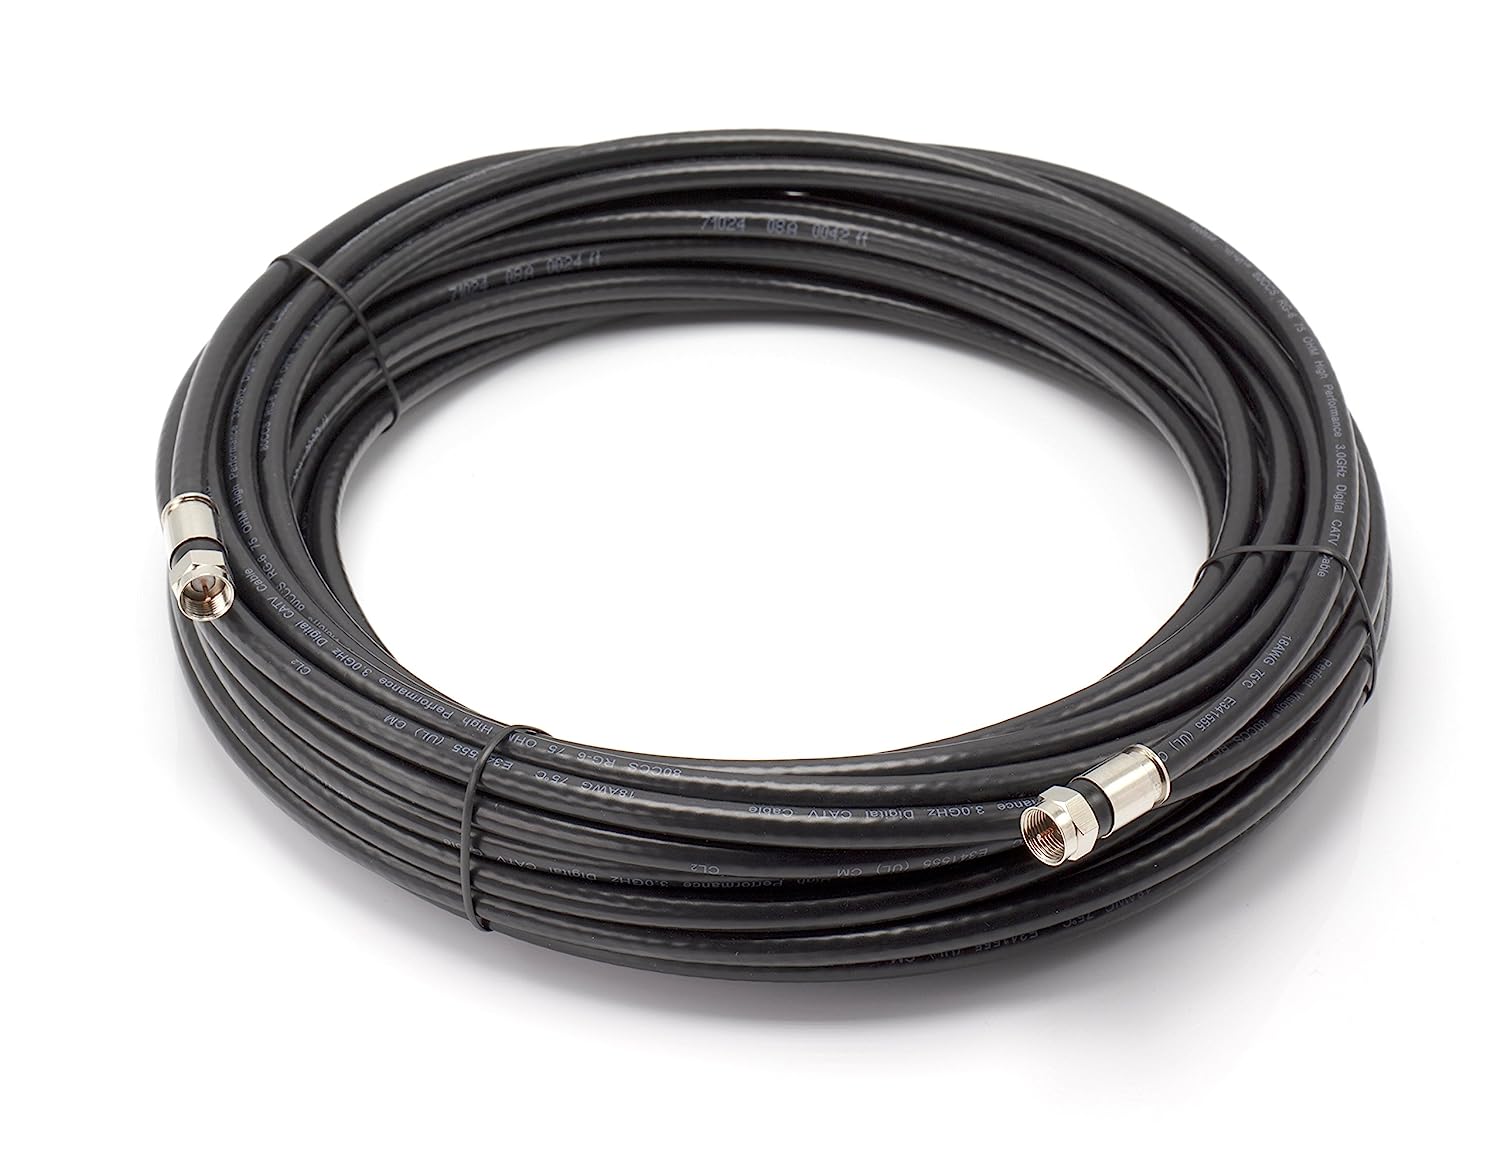 100' Feet, Black RG6 Coaxial Cable (Coax Cable) with [...]